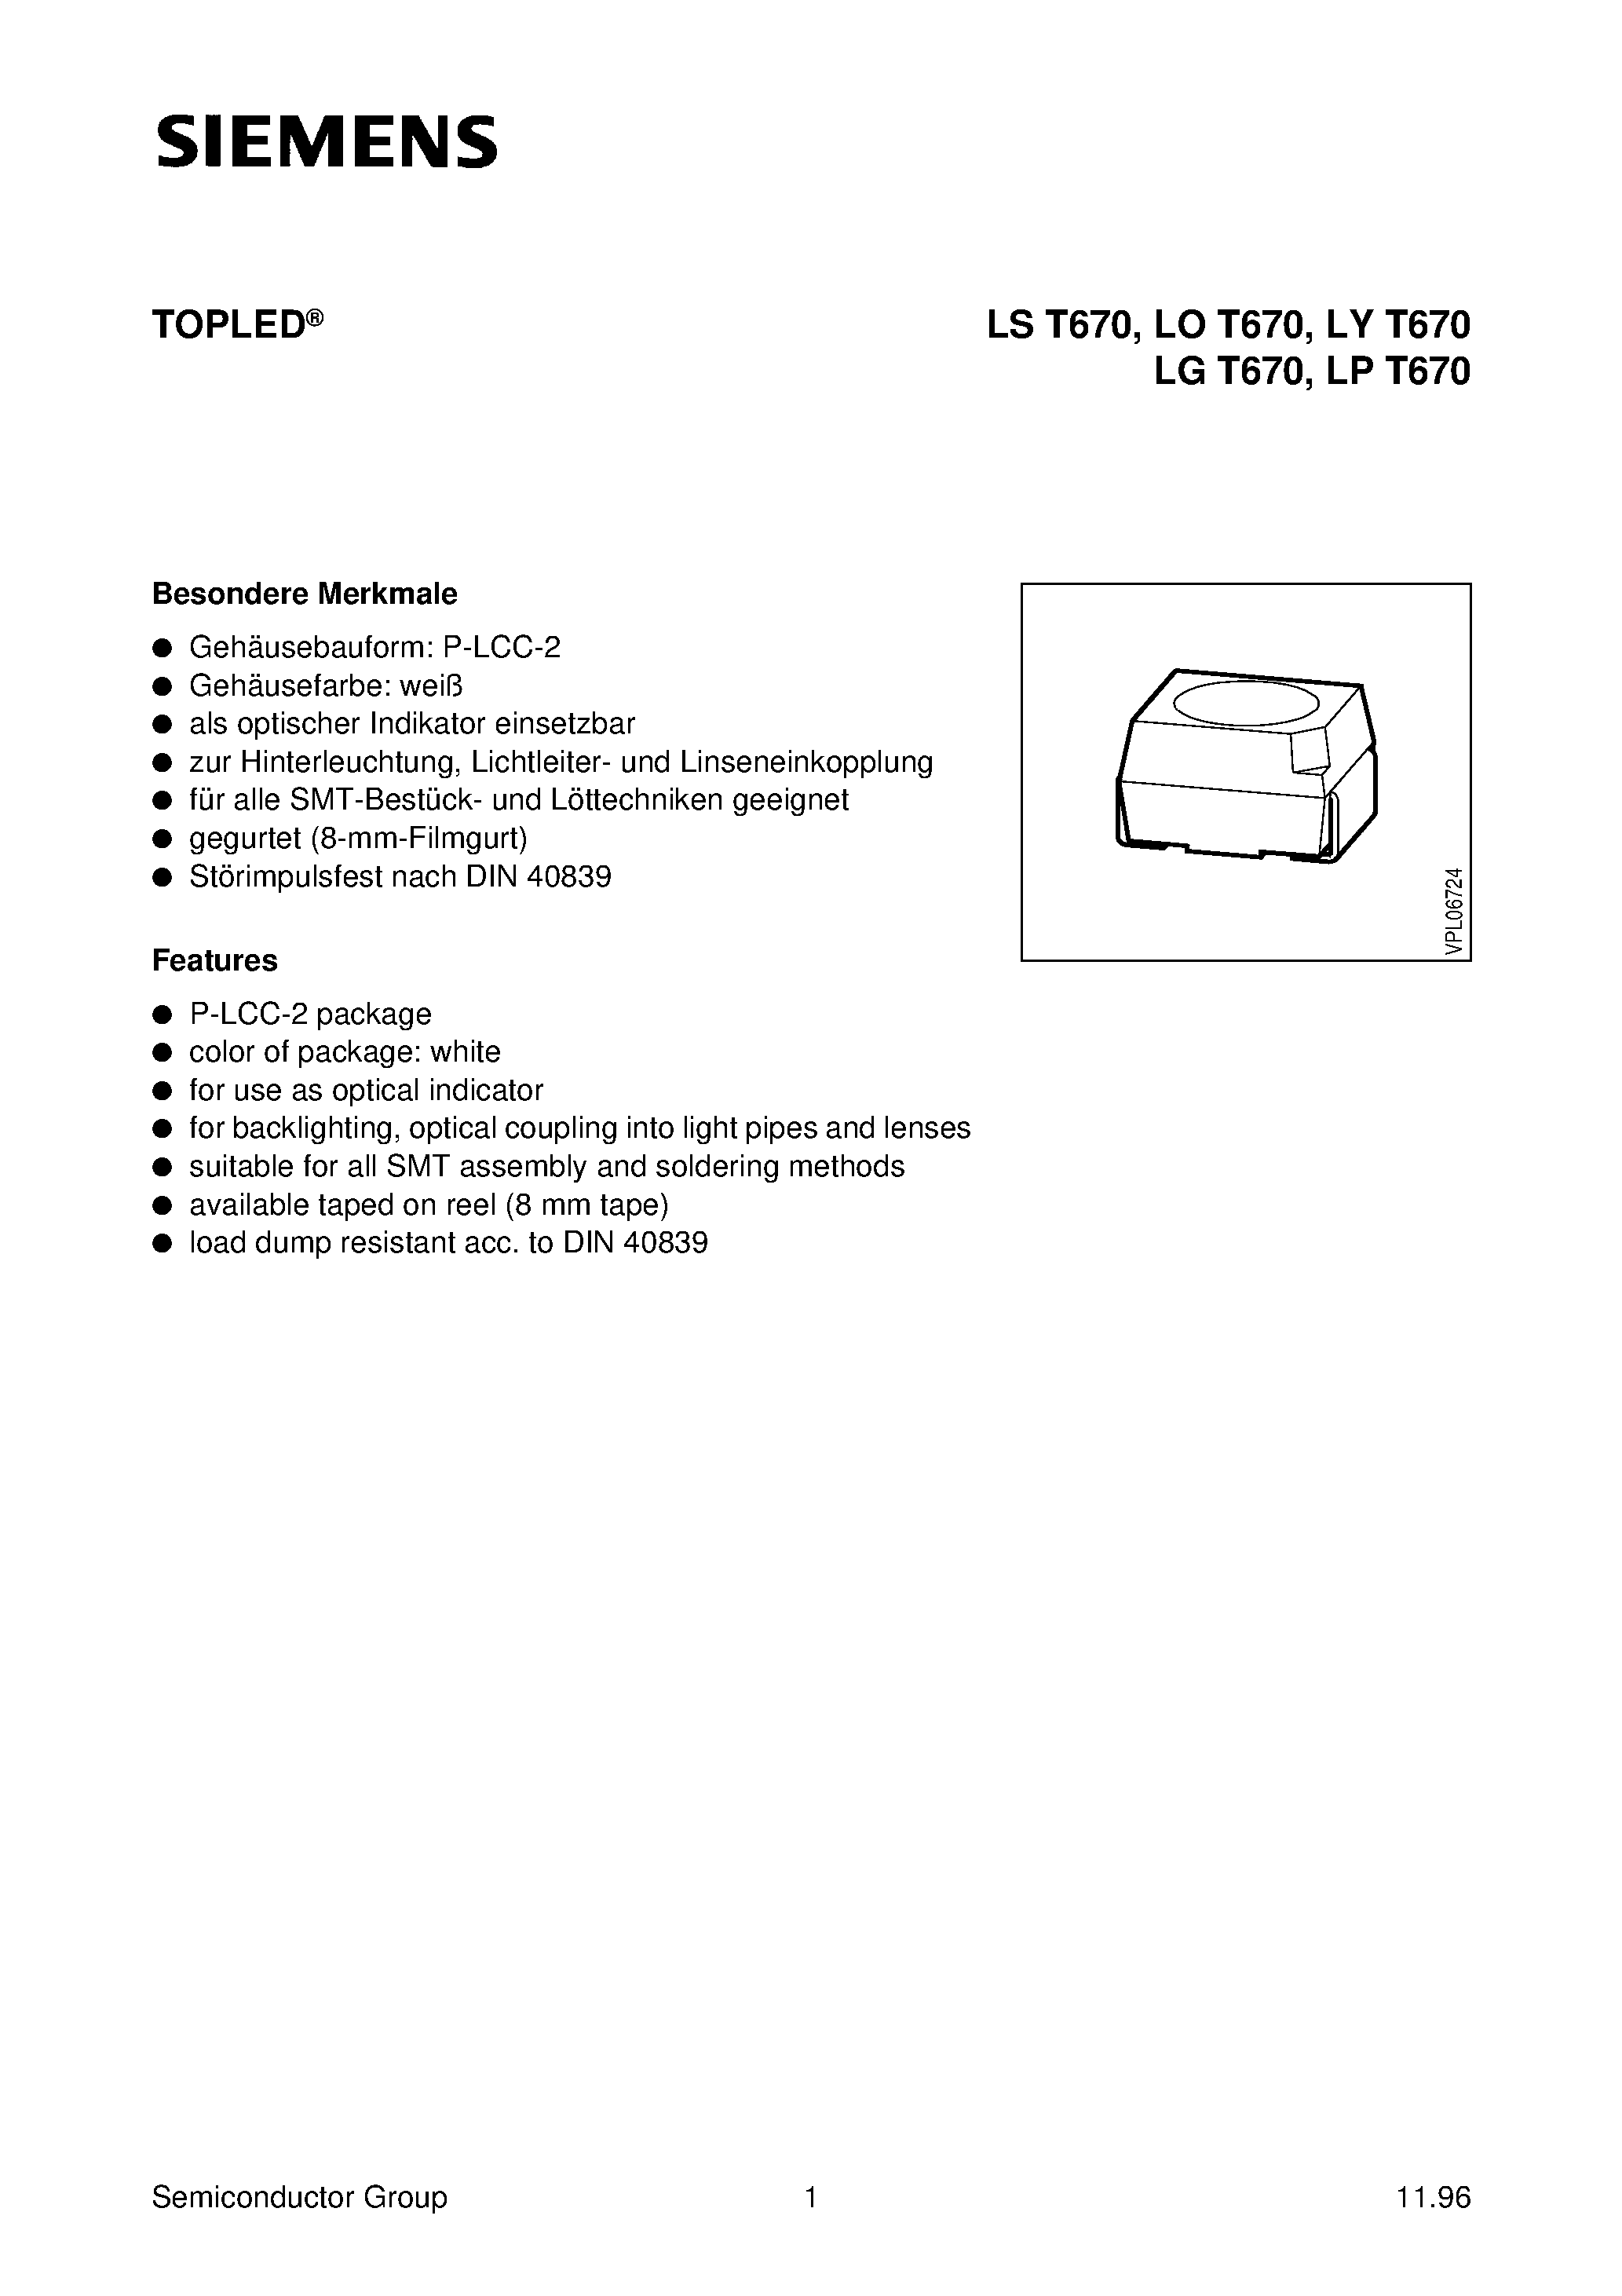 Datasheet LST670-K - TOPLED page 1